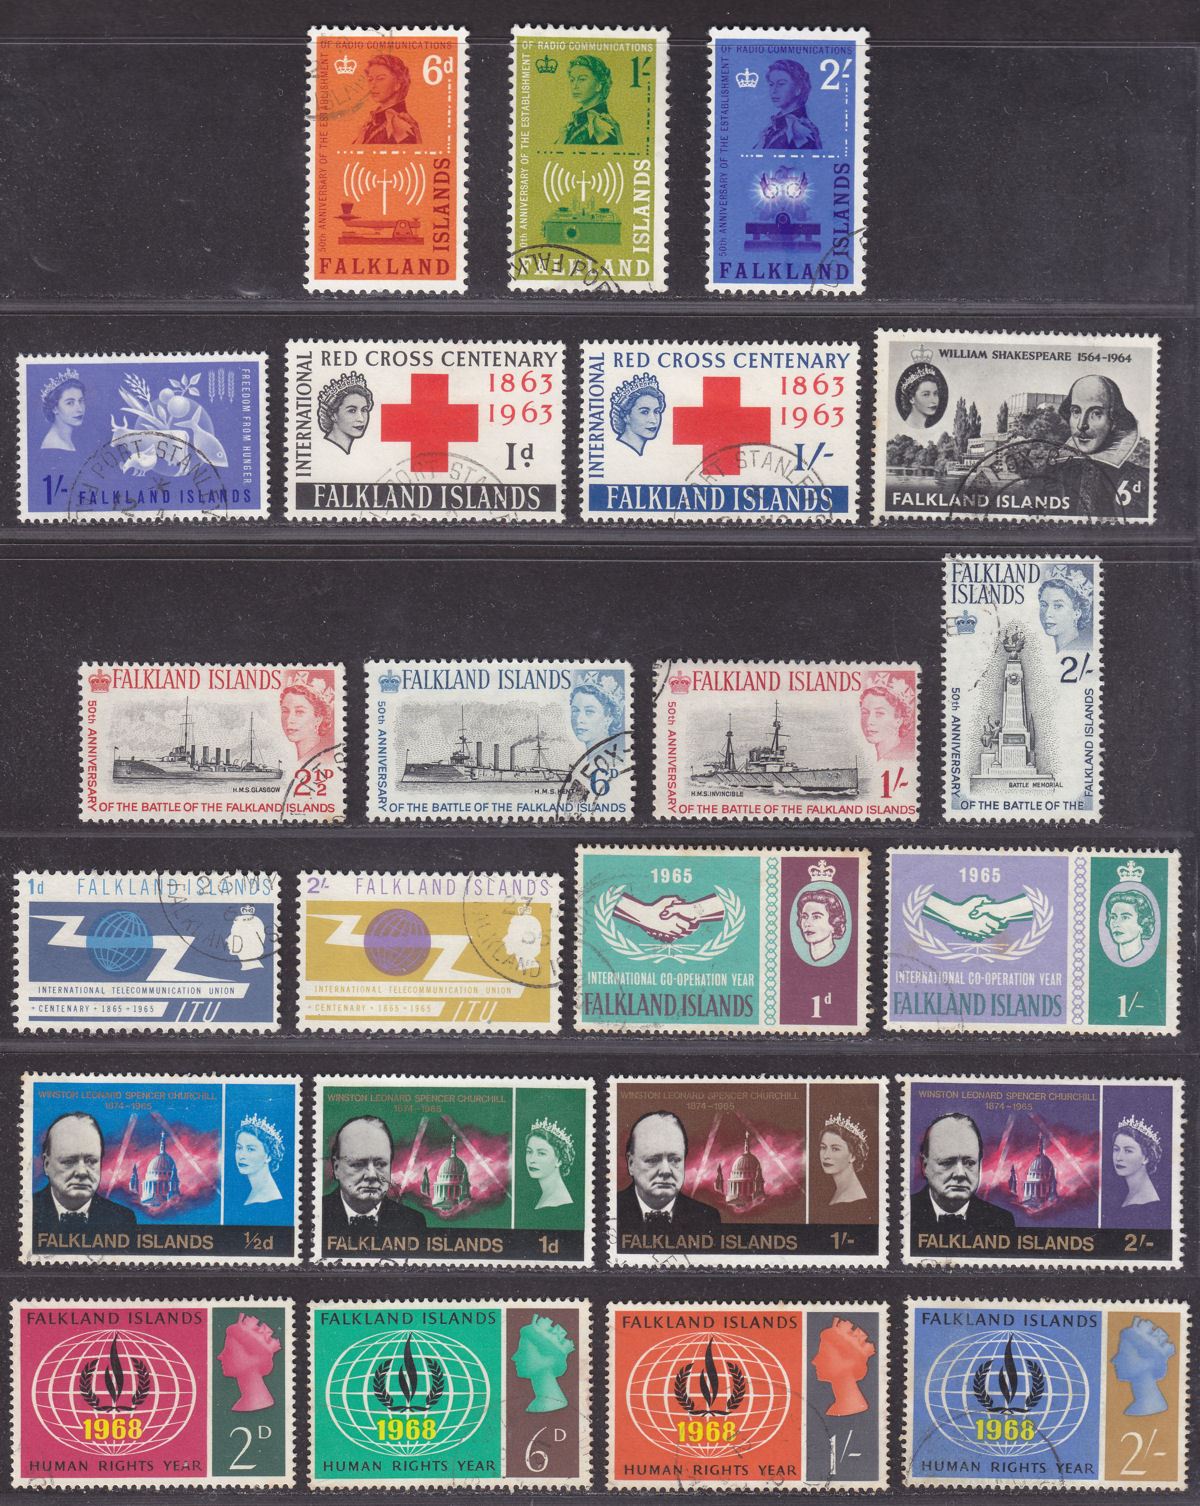 Falkland Islands 1962-68 QEII Used Selection incl Red Cross, Battle, Churchill